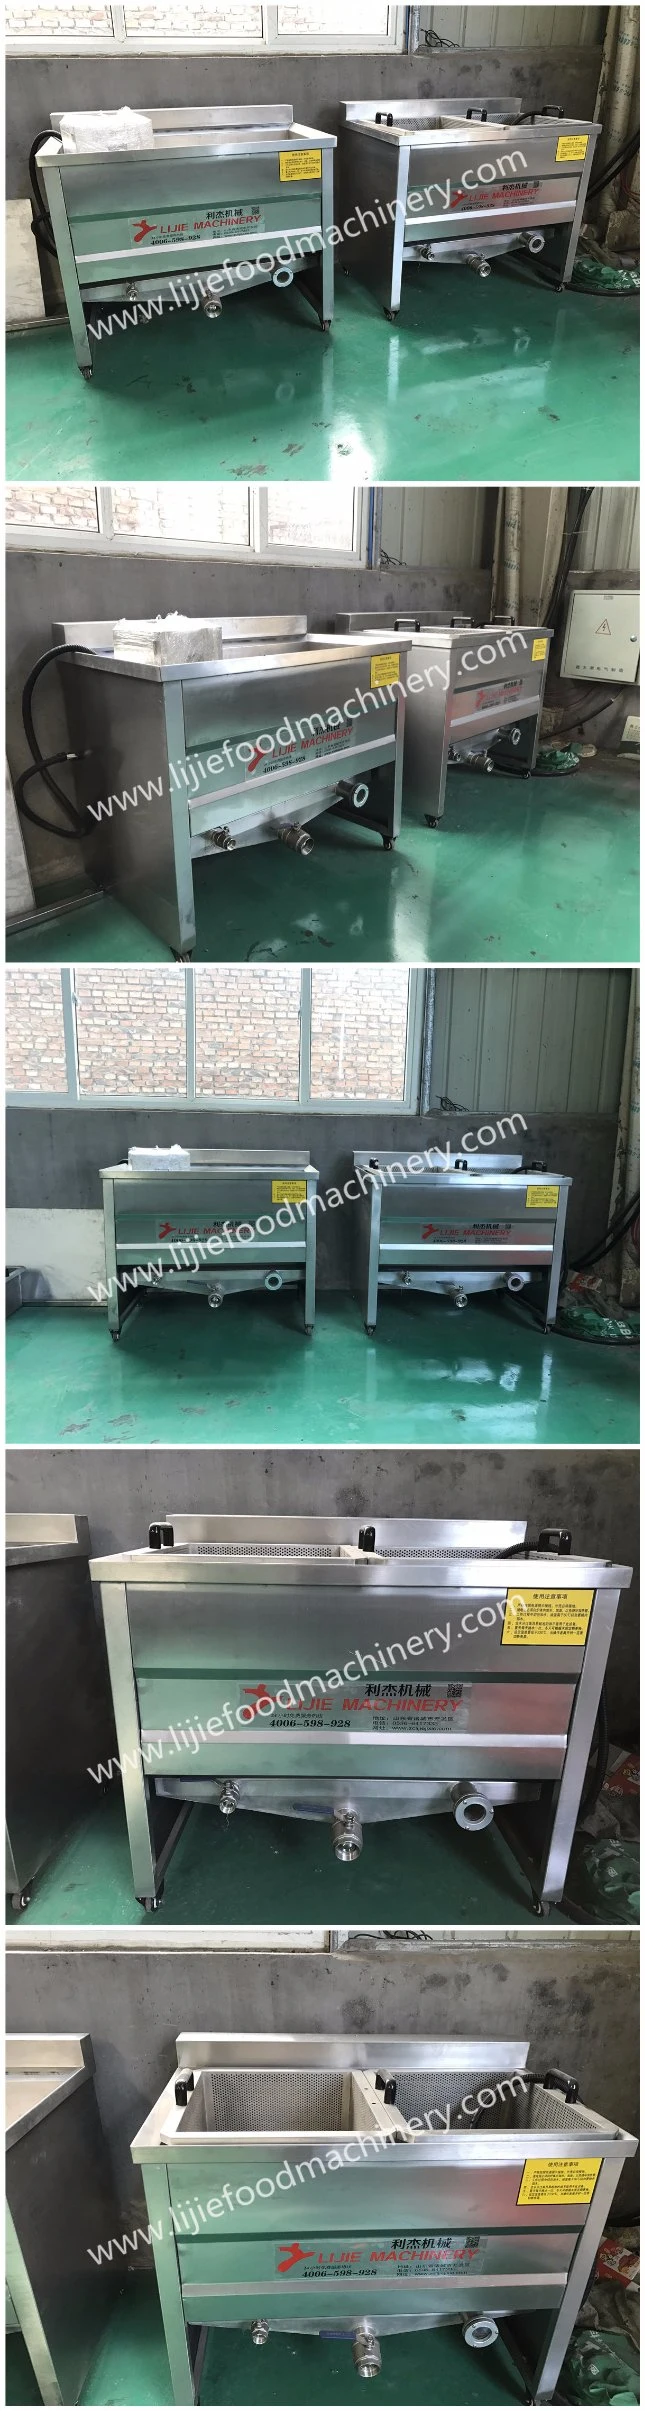 Commercial Electric Fryer Stainless Steel Potato Chips Making Machine2 Tank 2 Basket Electric Deep Fryer